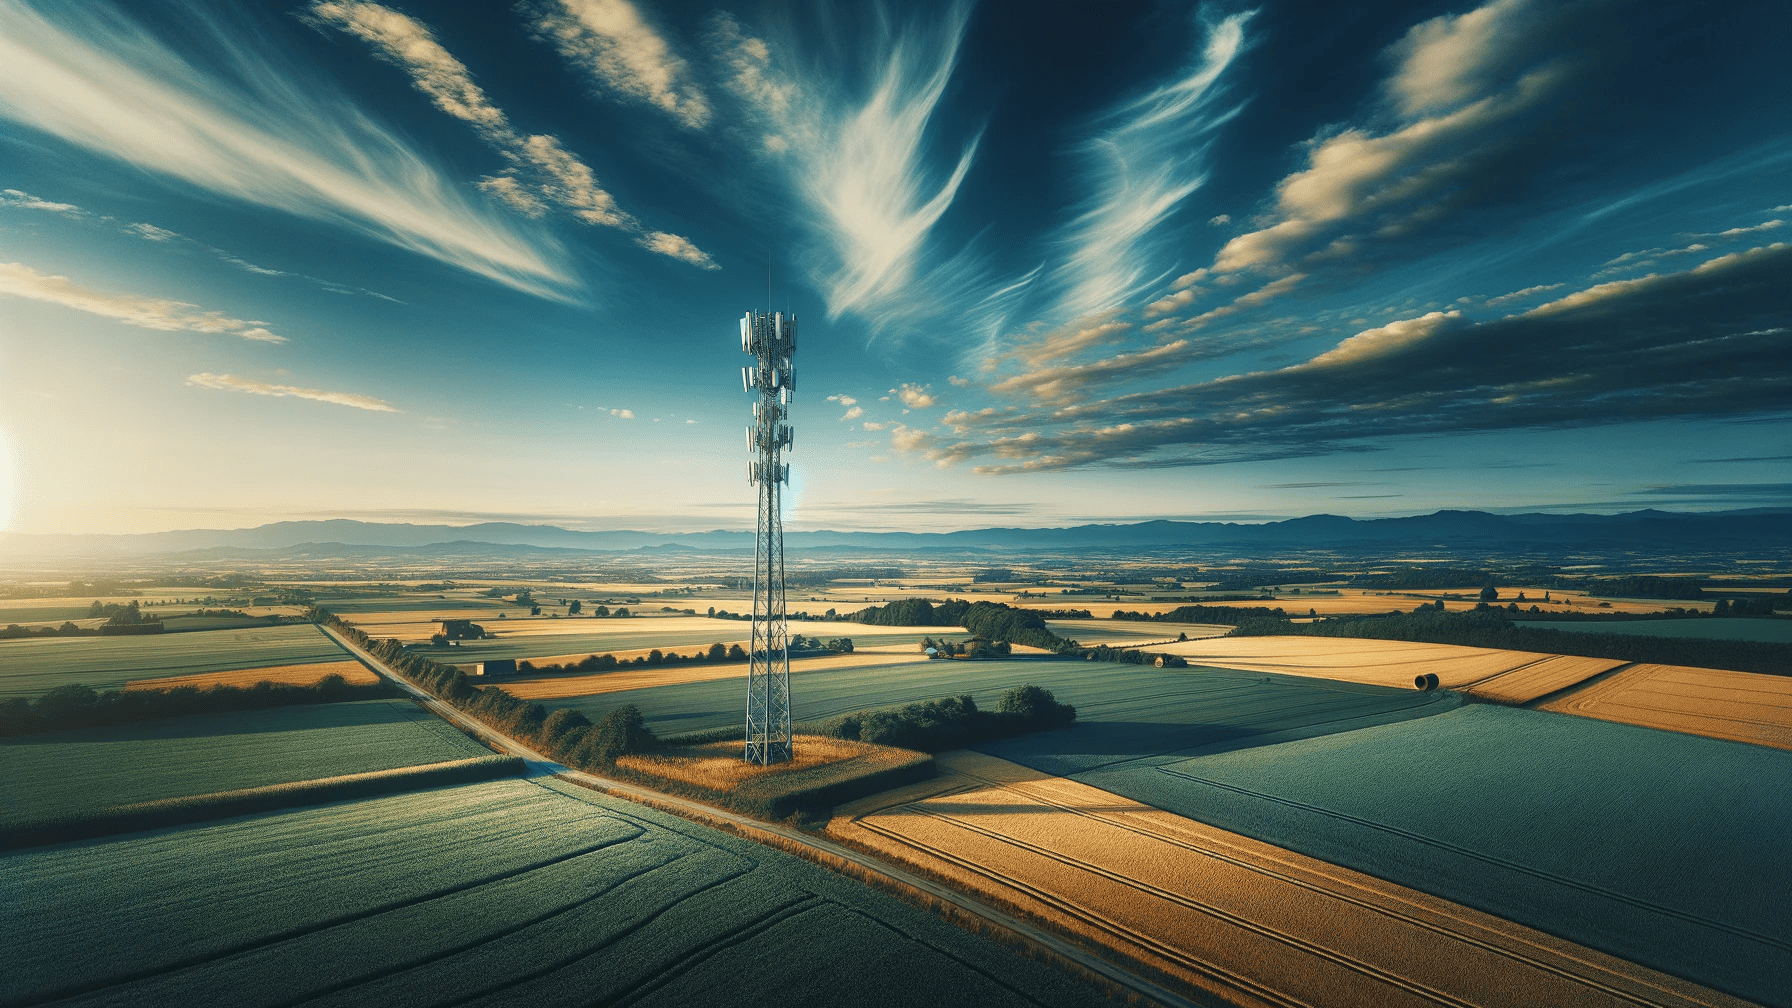 A rural landscape with a 5G cell tower in view